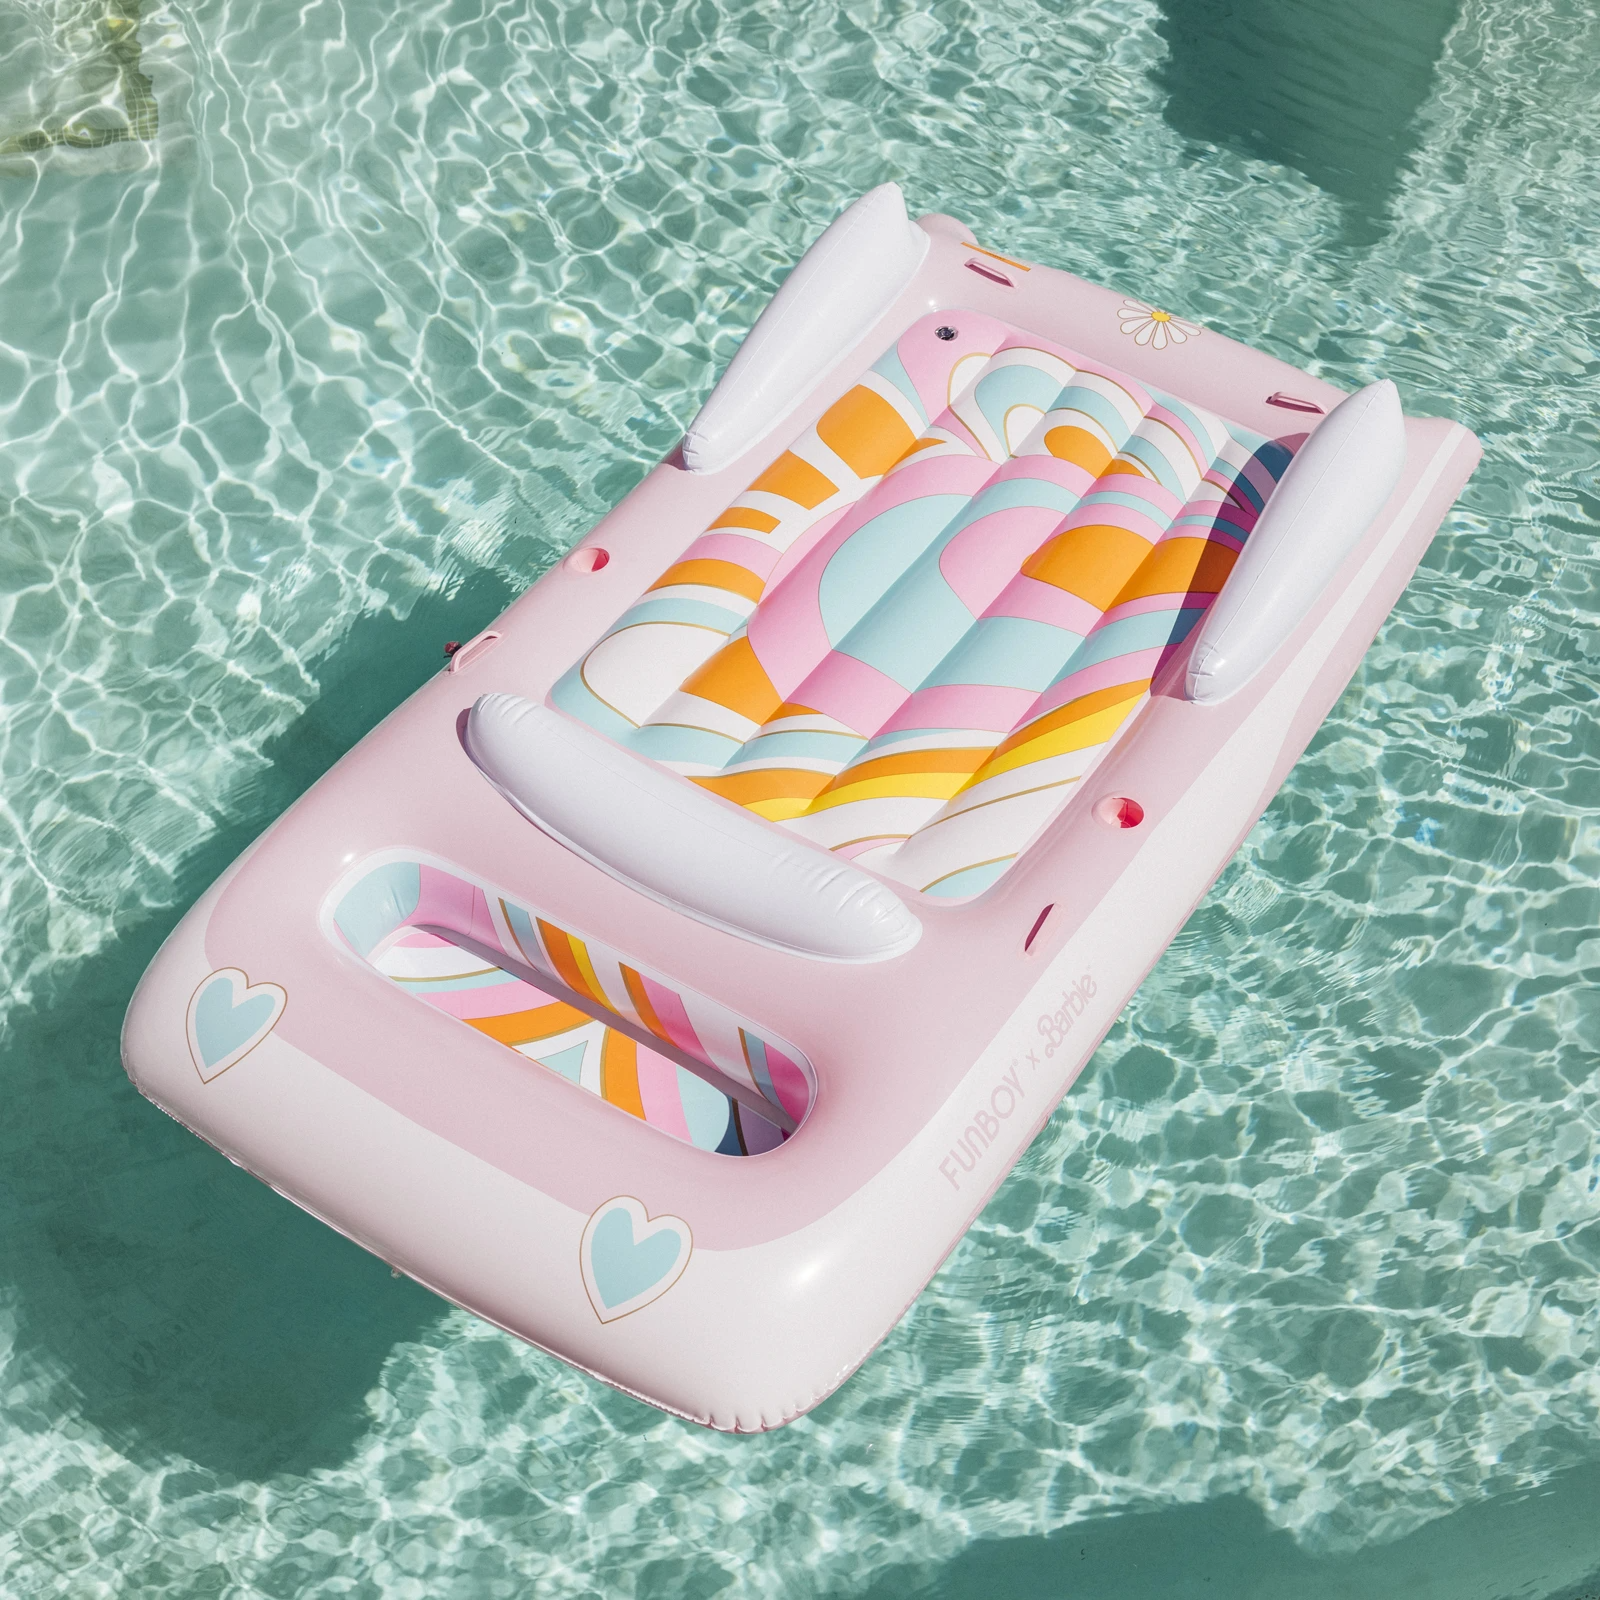 FUNBOY BRB-Convertible x Inflatable Pool Float Barbie-Pink